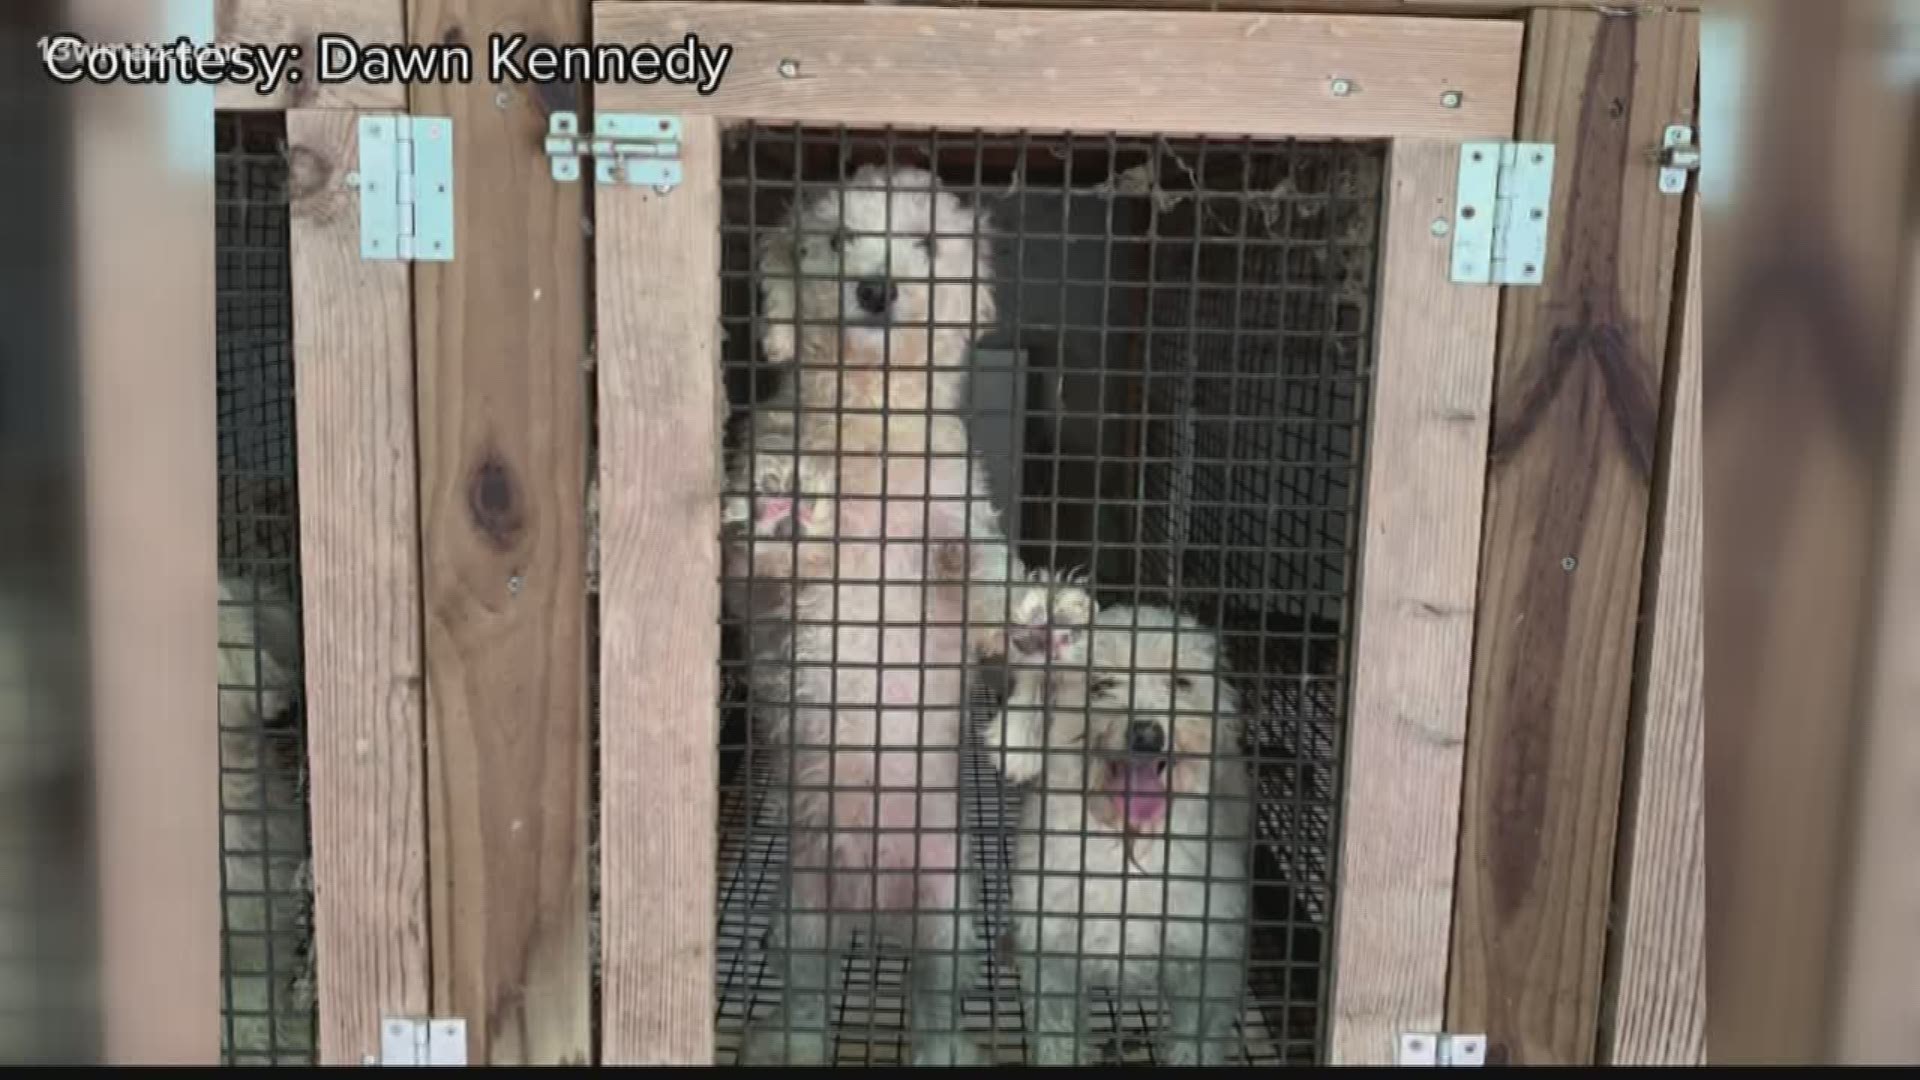 Two Monroe County women were arrested after deputies said they found abandoned and neglected dogs at their home. According to a news release from the Monroe County Sheriff's Office, Lynda Cummings and her daughter Brandi Marzka face dozens of animal-abuse charges.